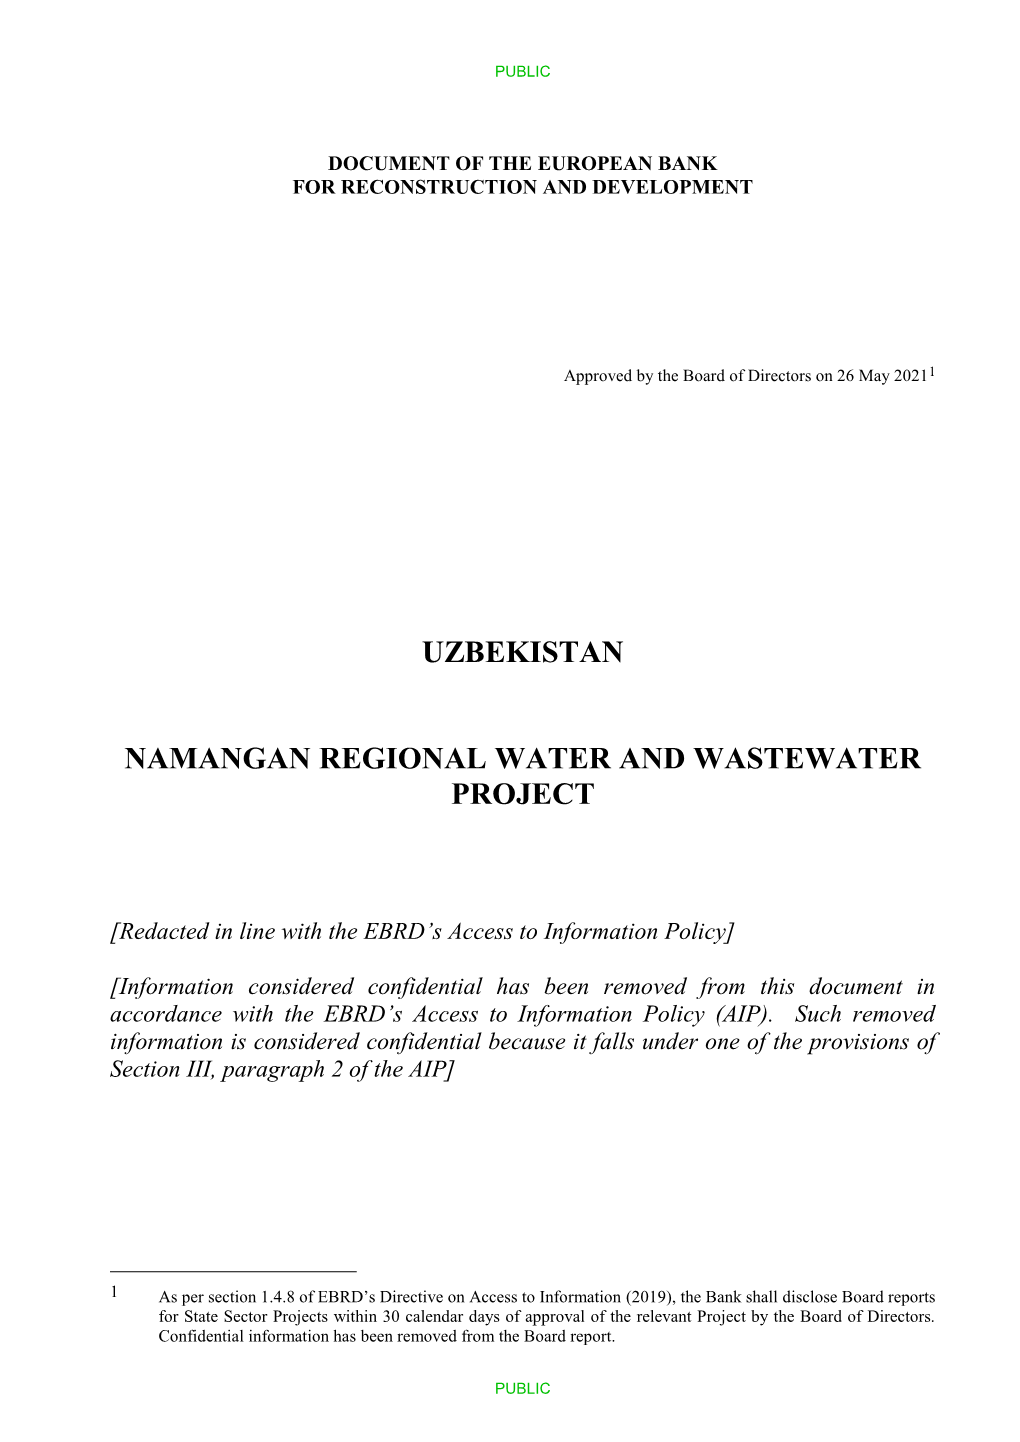 Namangan Regional Water and Wastewater Project Board Report